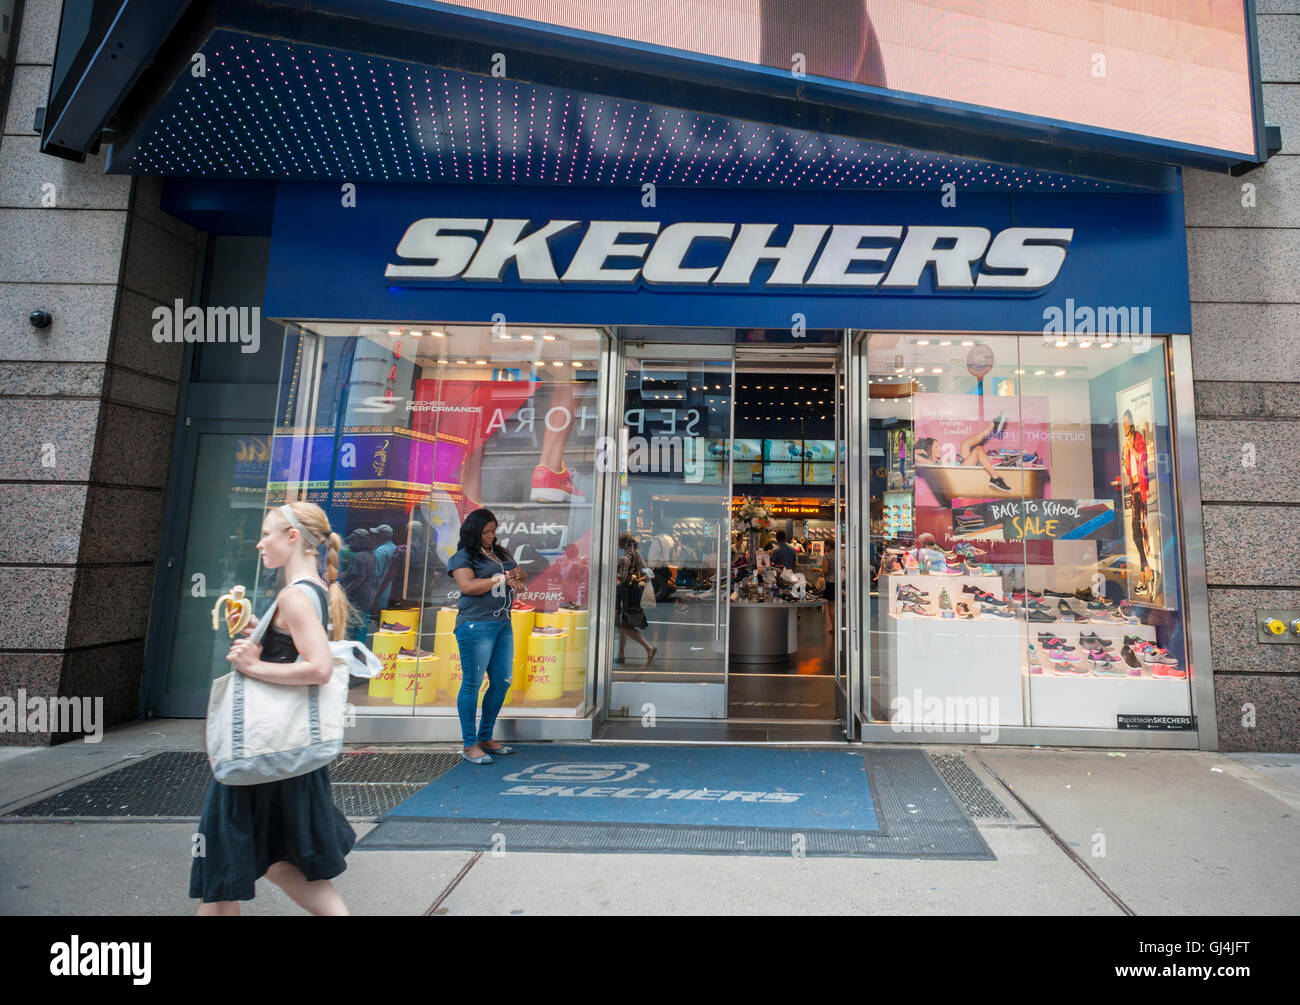 what time does the skechers store close